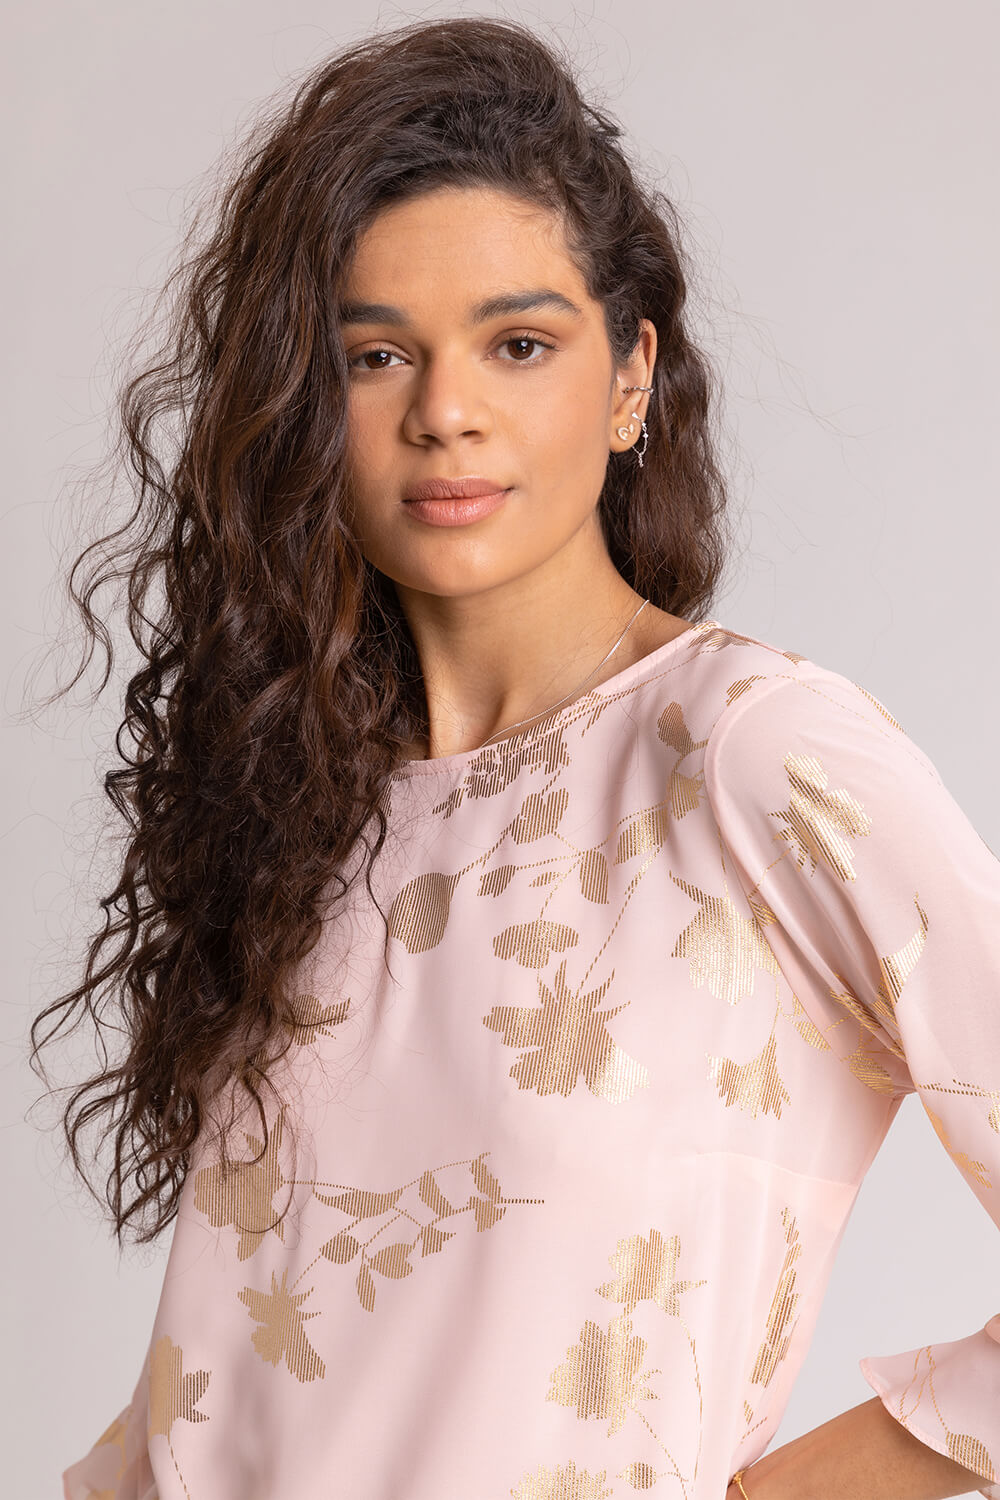 PINK Floral Foil Chiffon Flared Sleeve Top, Image 4 of 4